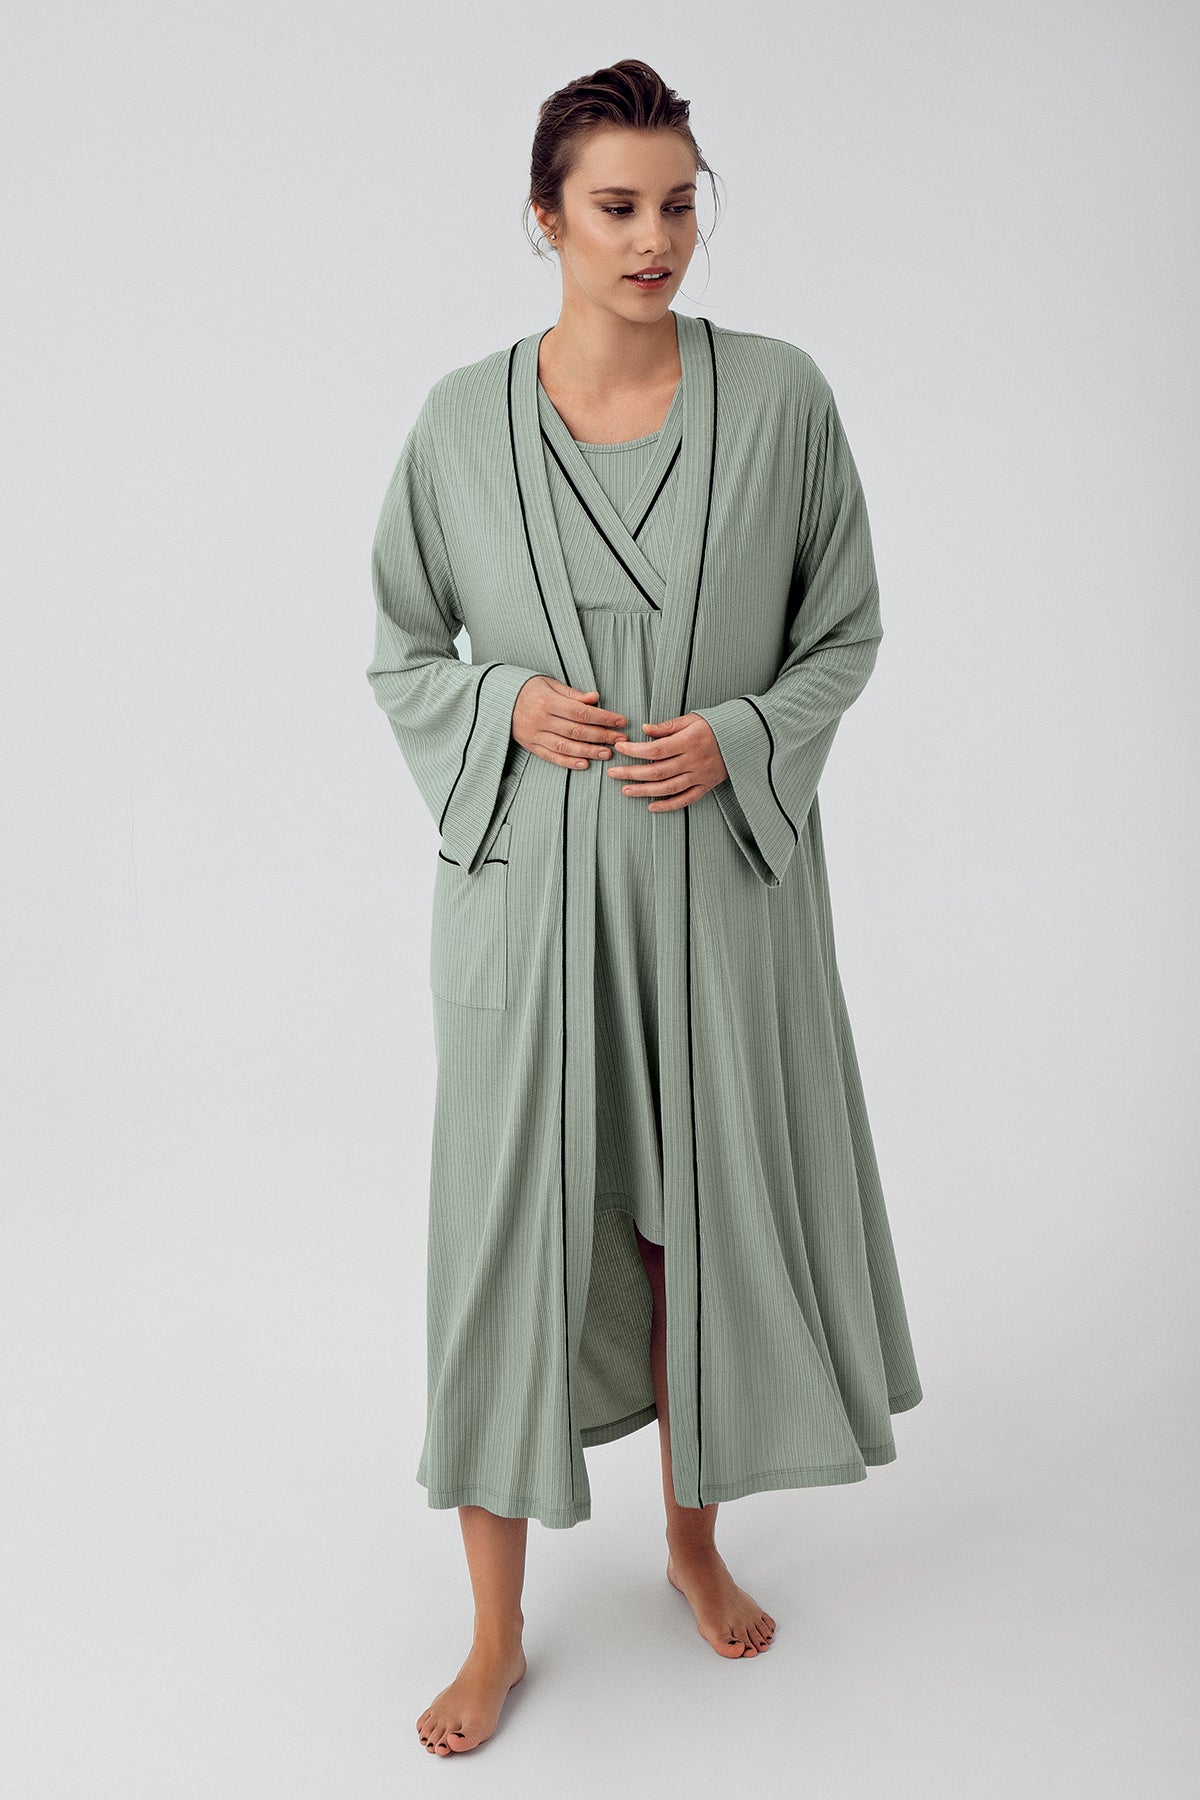 Shopymommy 16402 Double Breasted Maternity & Nursing Nightgown With Robe Green